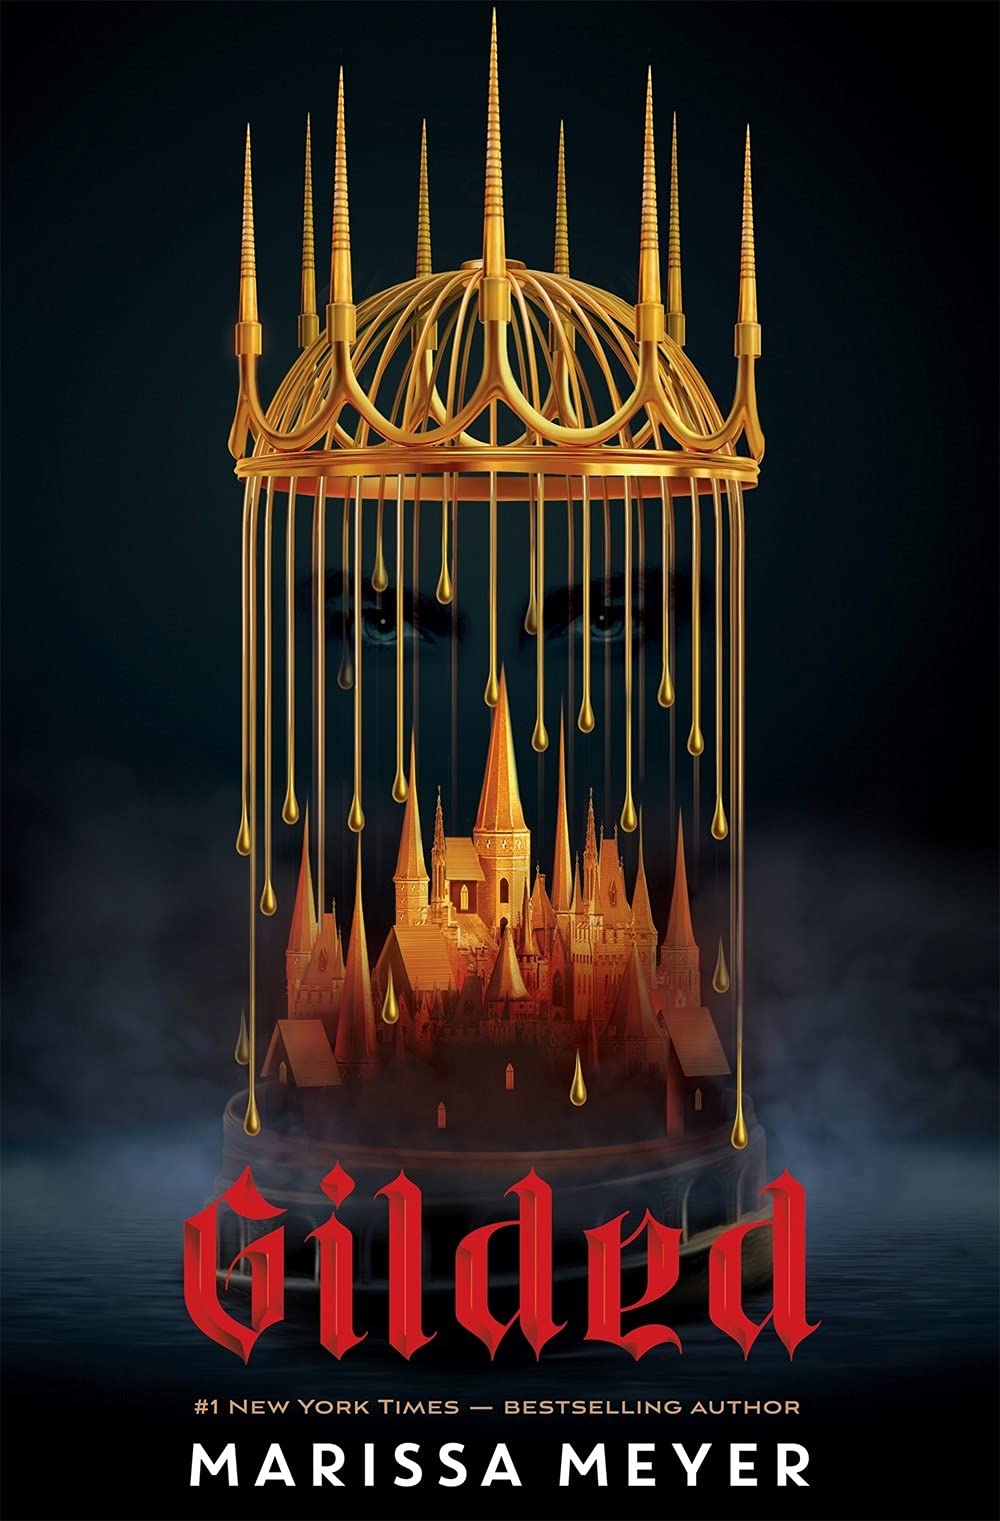 Cover of “Gilded” by Marissa Meyer